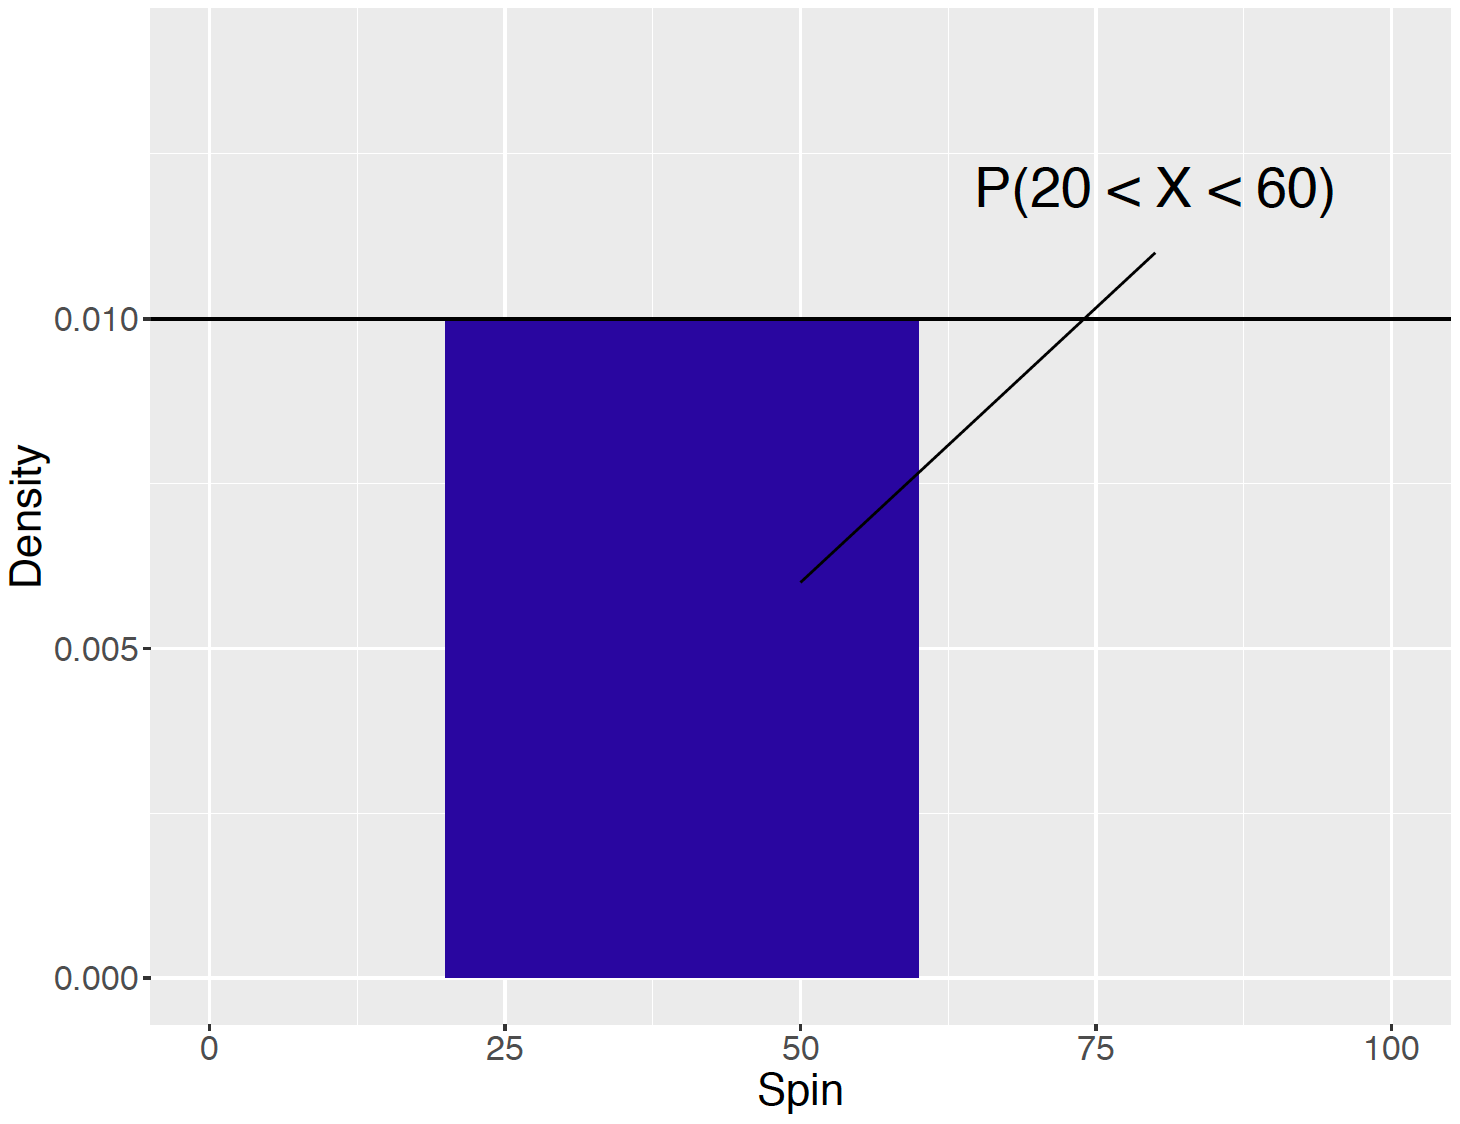 Illustration of finding the probability of $P(20 < X < 60)$.